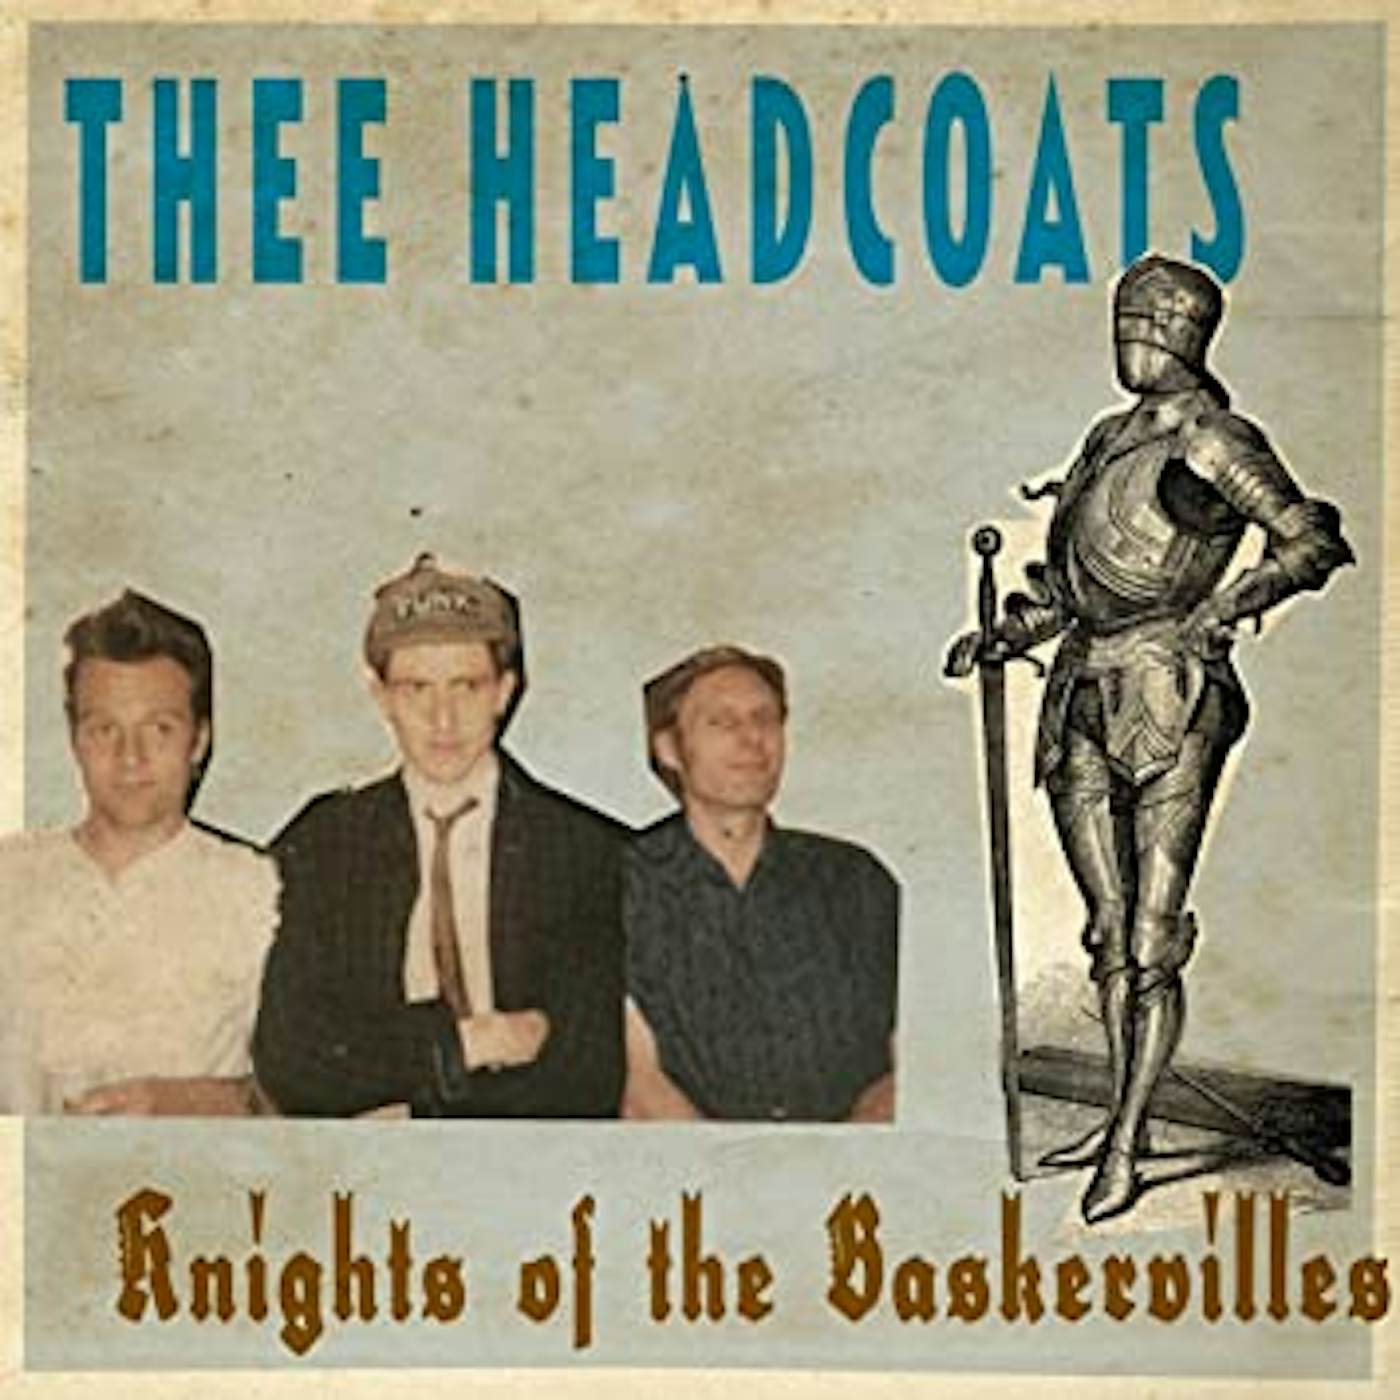 Thee Headcoats Knights Of The Baskervilles Vinyl Record